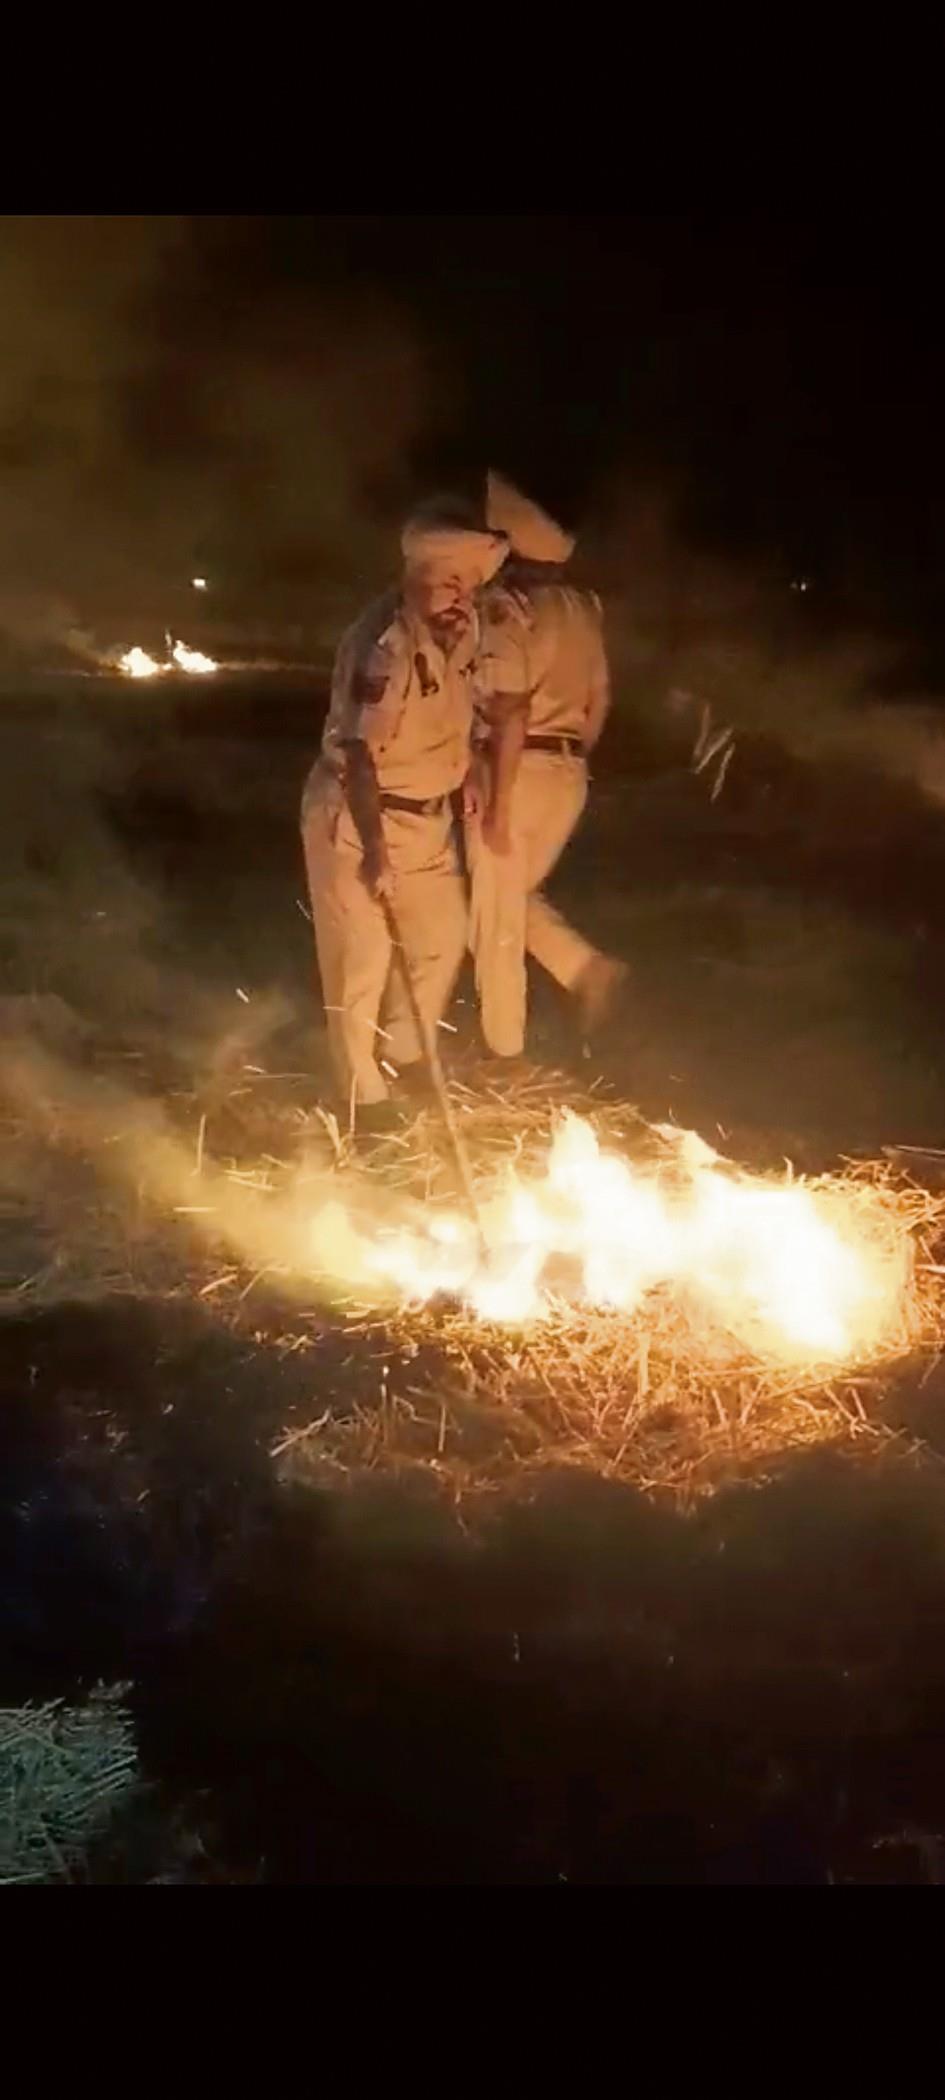 To check farm fires, Ropar cops on their toes, literally; video goes viral